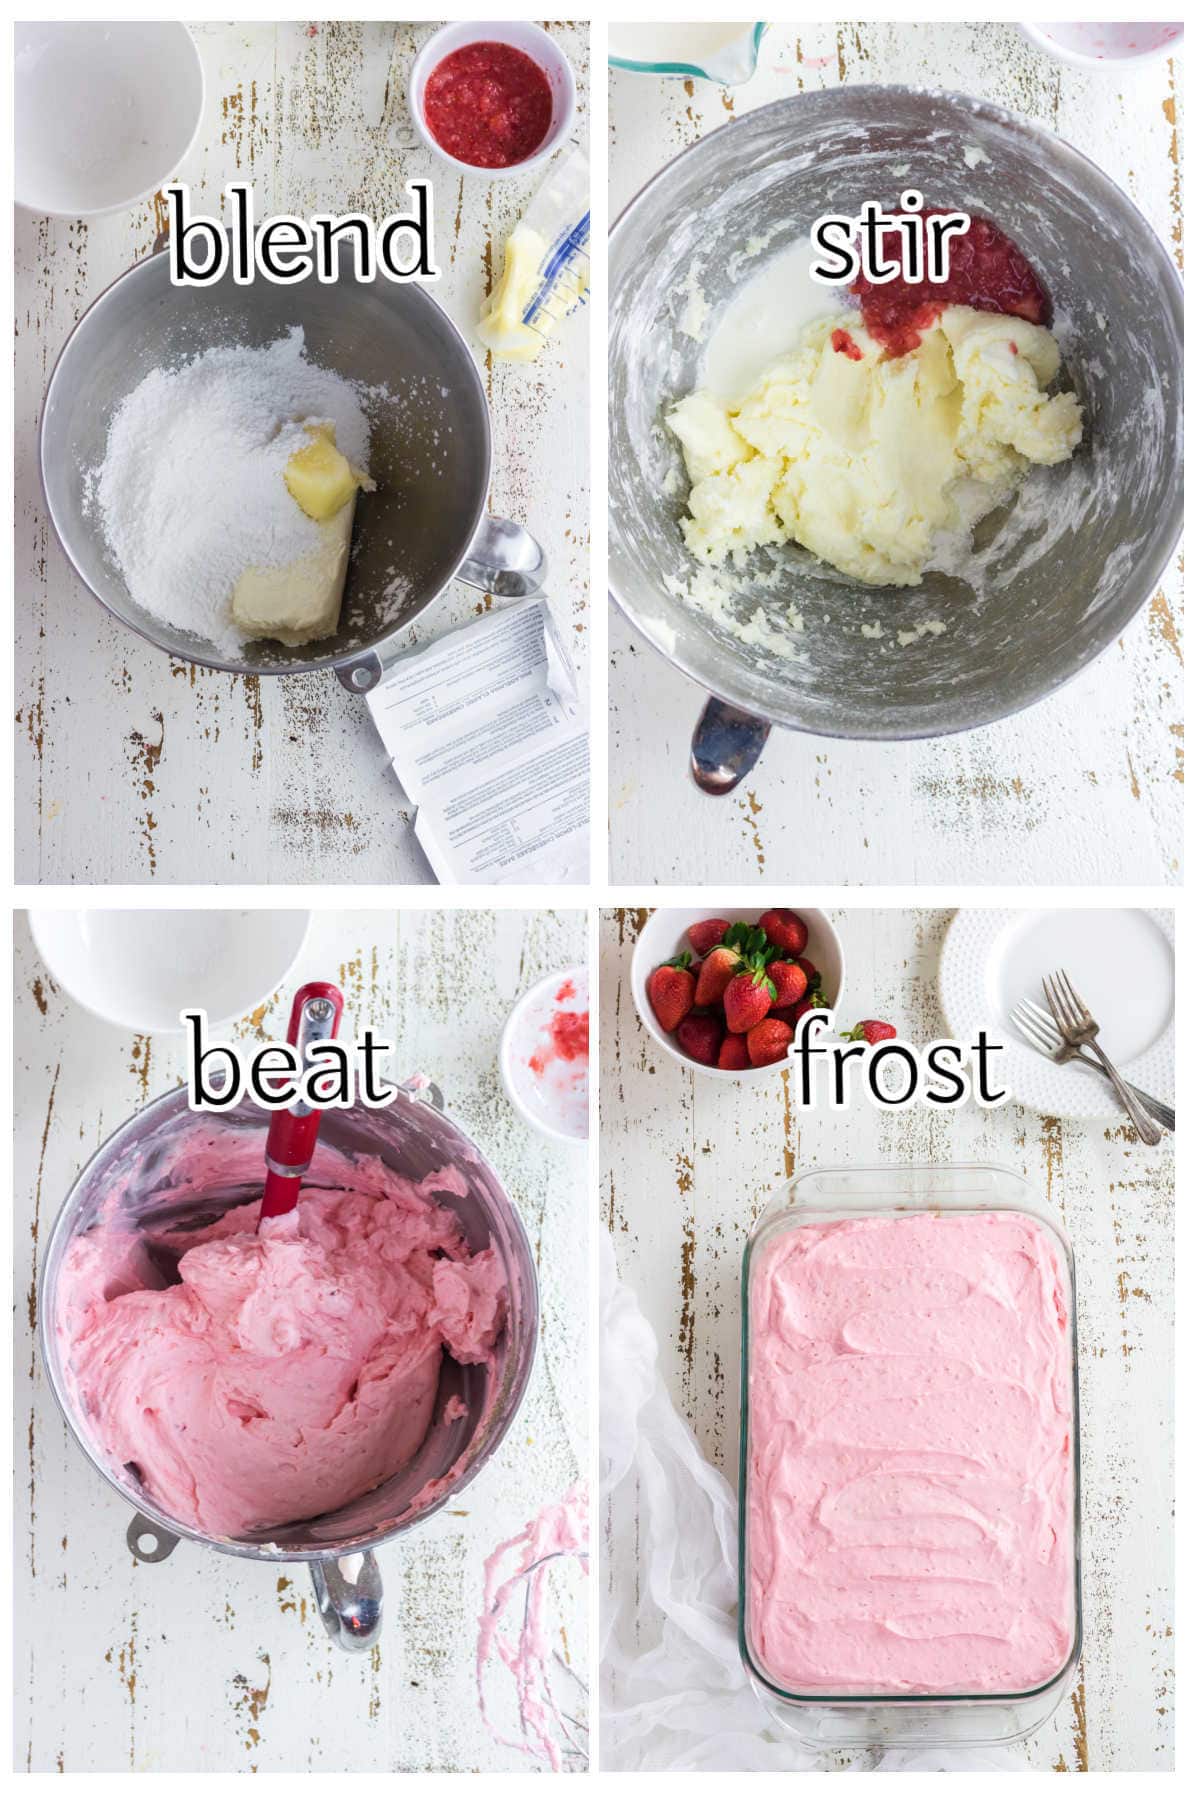 Step by step images showing how to make the frosting.